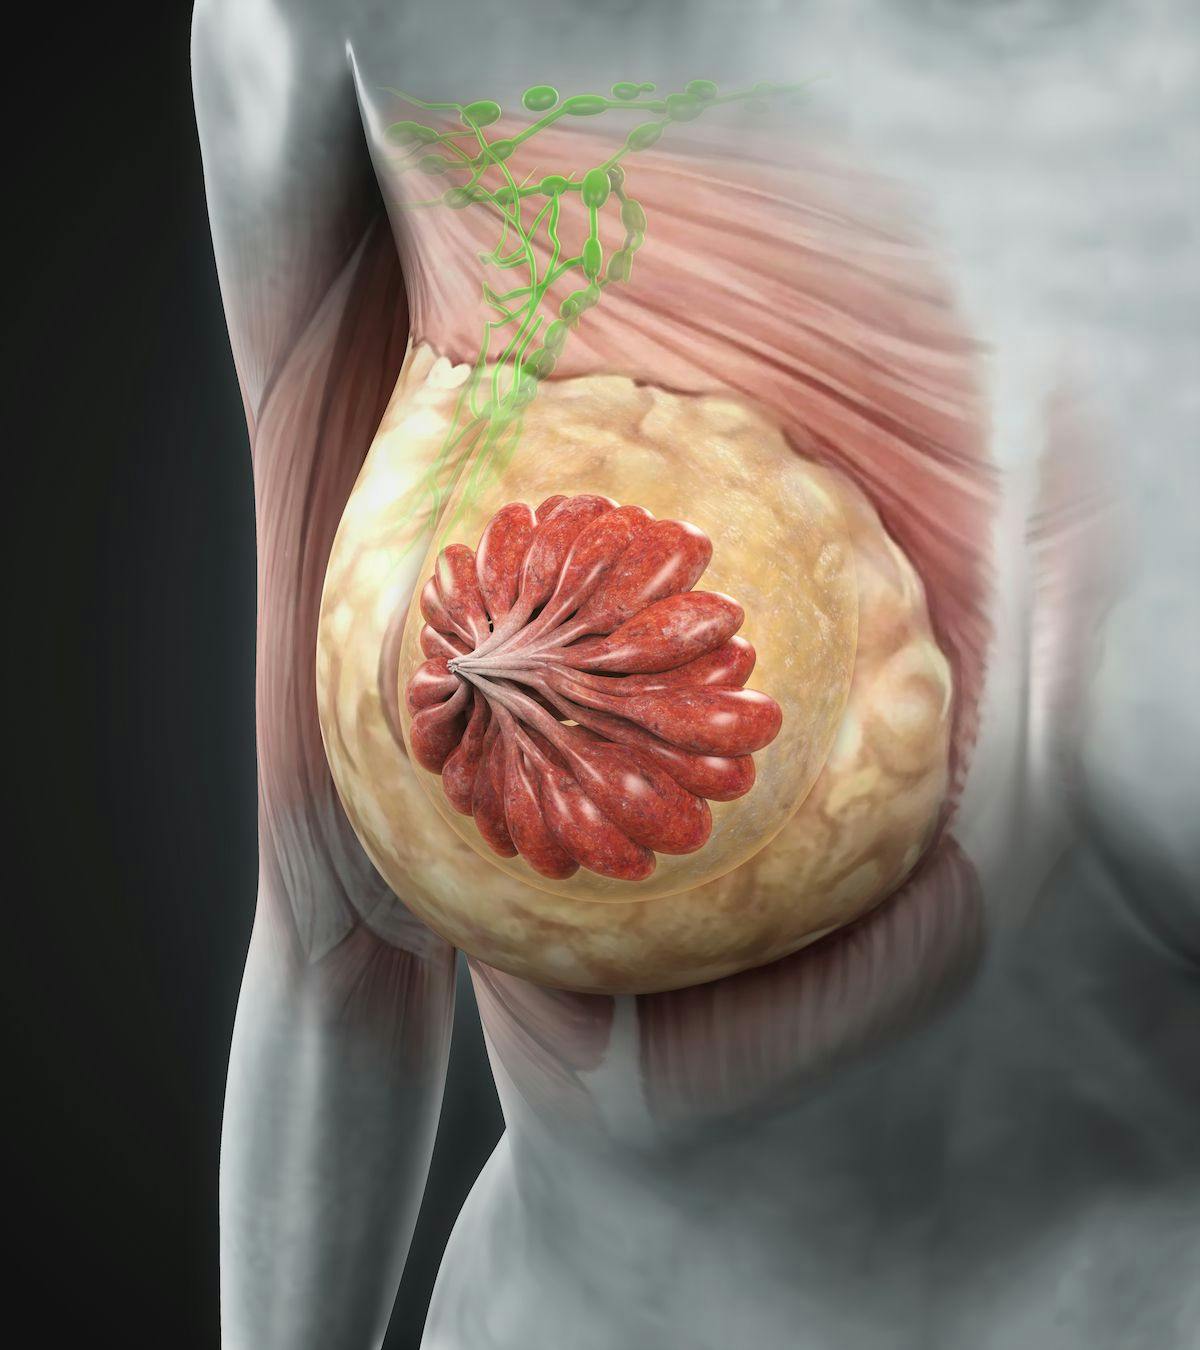 Findings from a phase 3 trial highlight regression of central nervous system metastases across all heavily pretreated breast cancer subtypes with Bria-IMT.